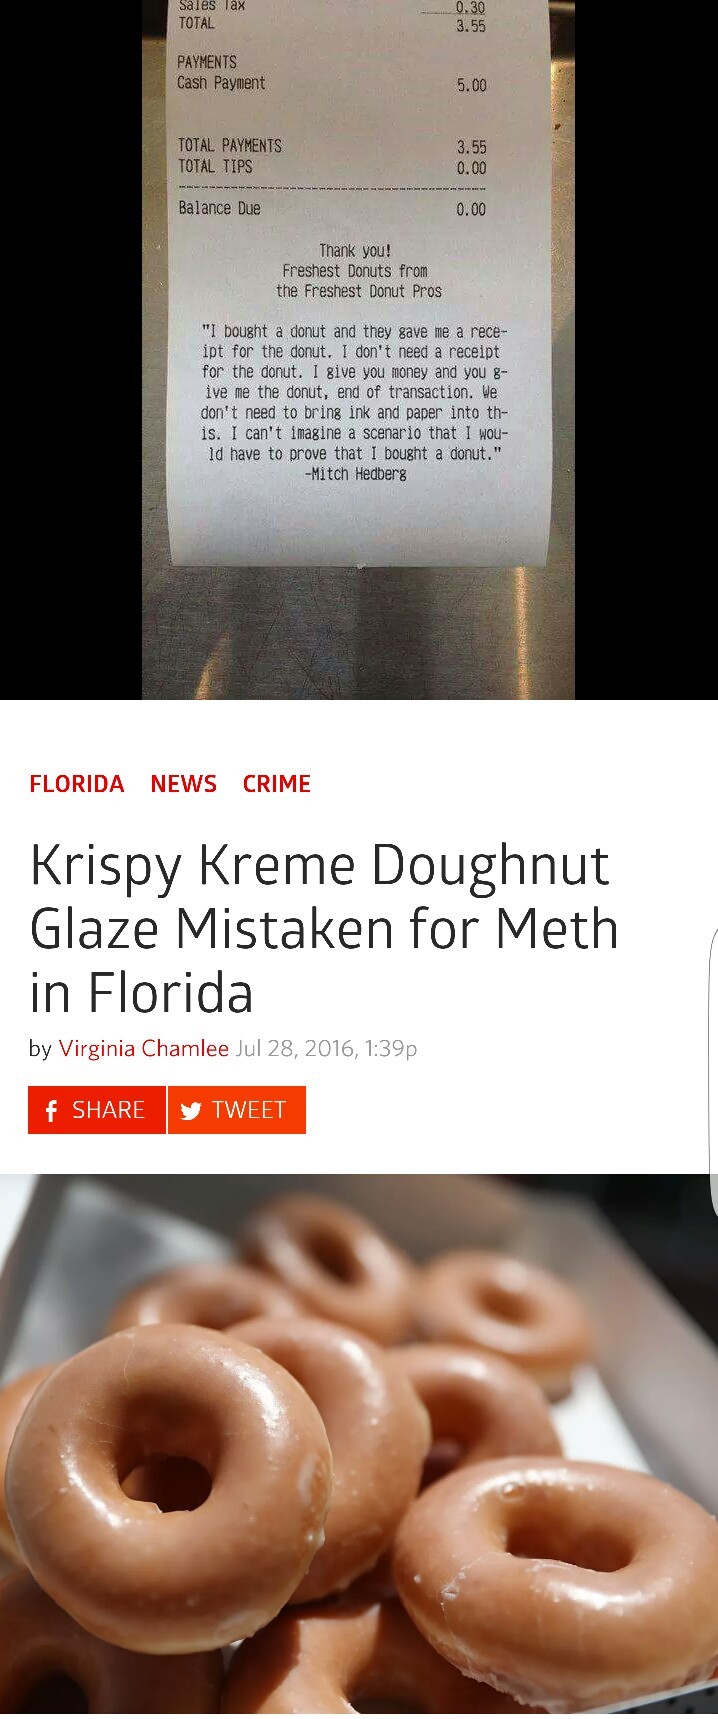 Perfect time to prove you bought a donut and not meth - meme